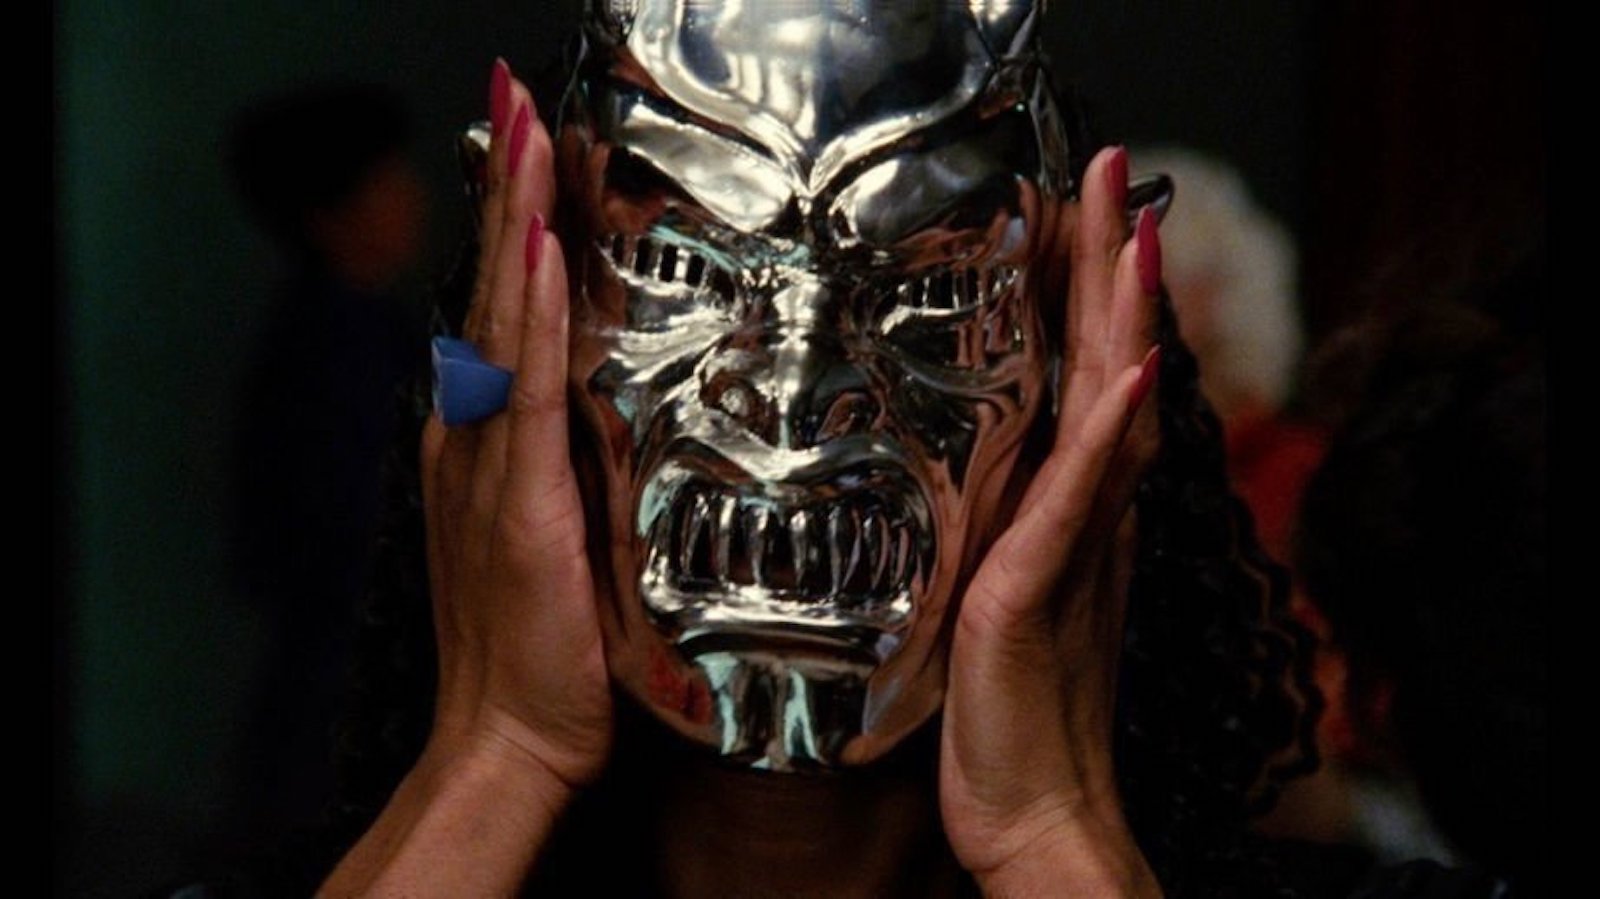 A woman with painted fingernails holds up a silver demon mask over her face and looks at camera